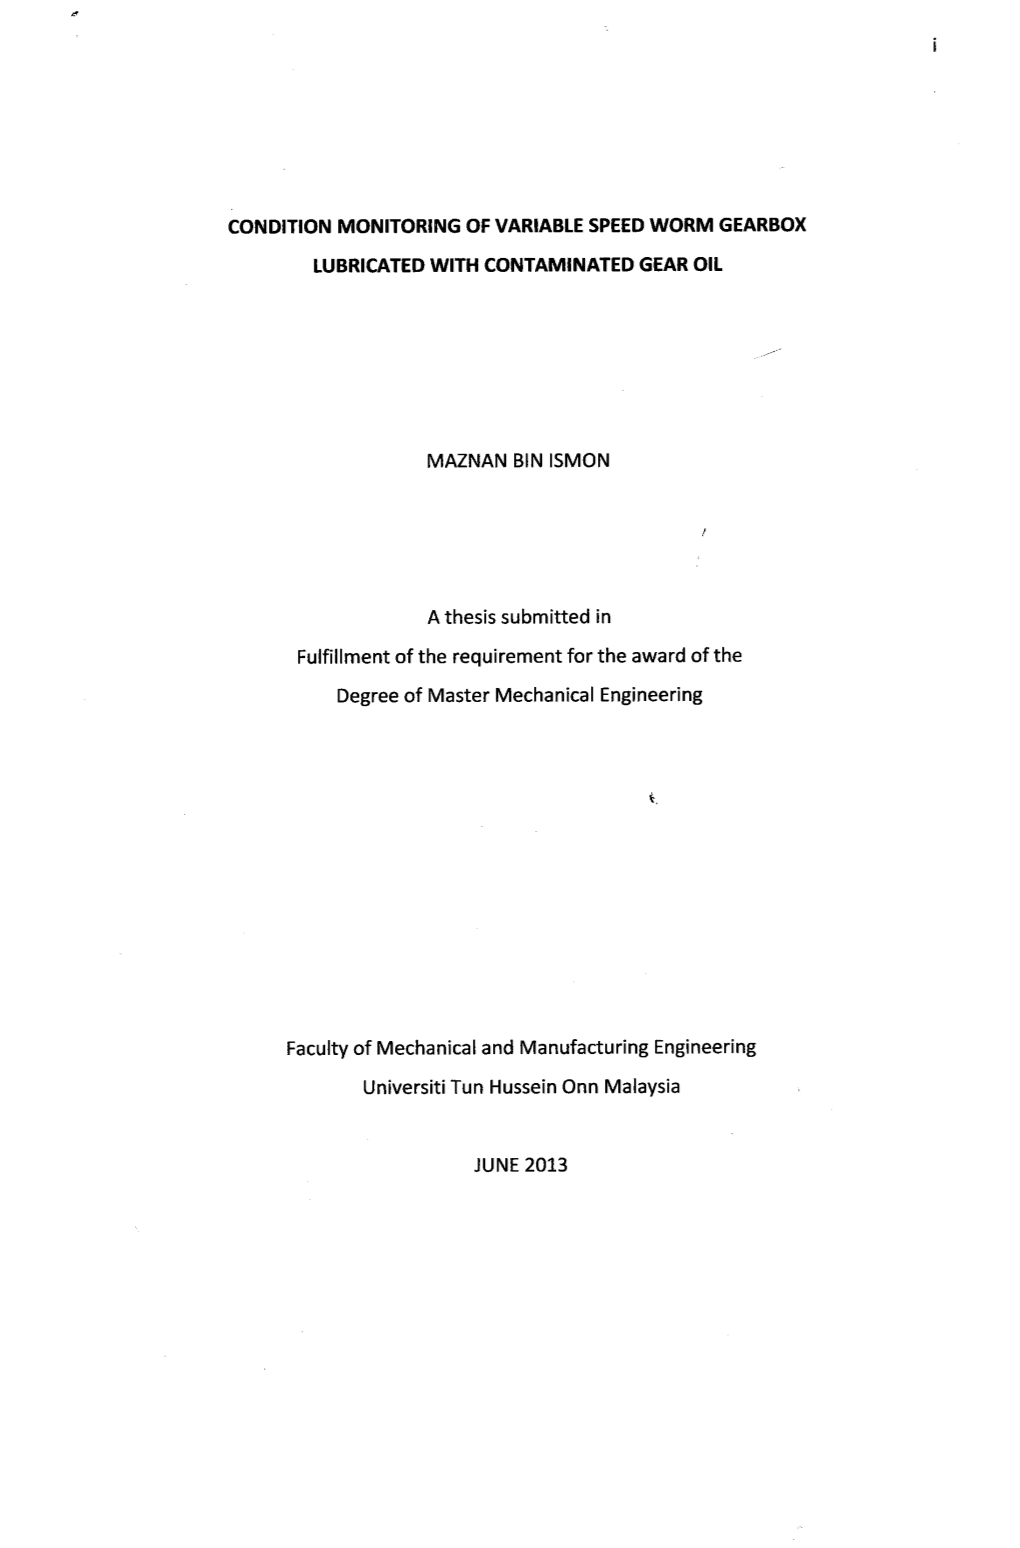 MAZNAN BIN ISMON a Thesis Submitted in Fulfillment of The